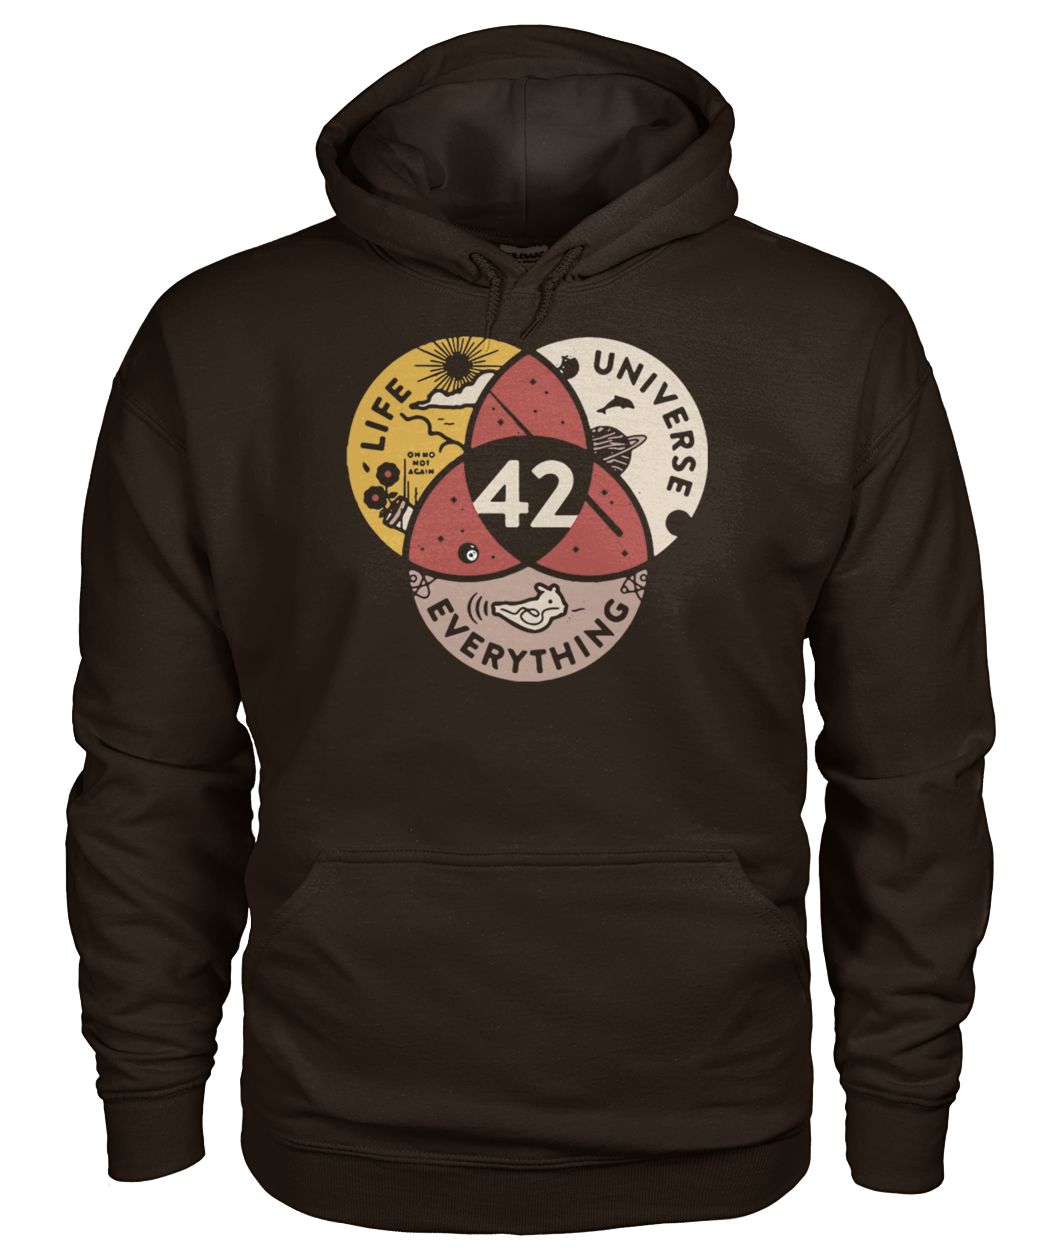 42 the answer to life the universe and everything gildan hoodie